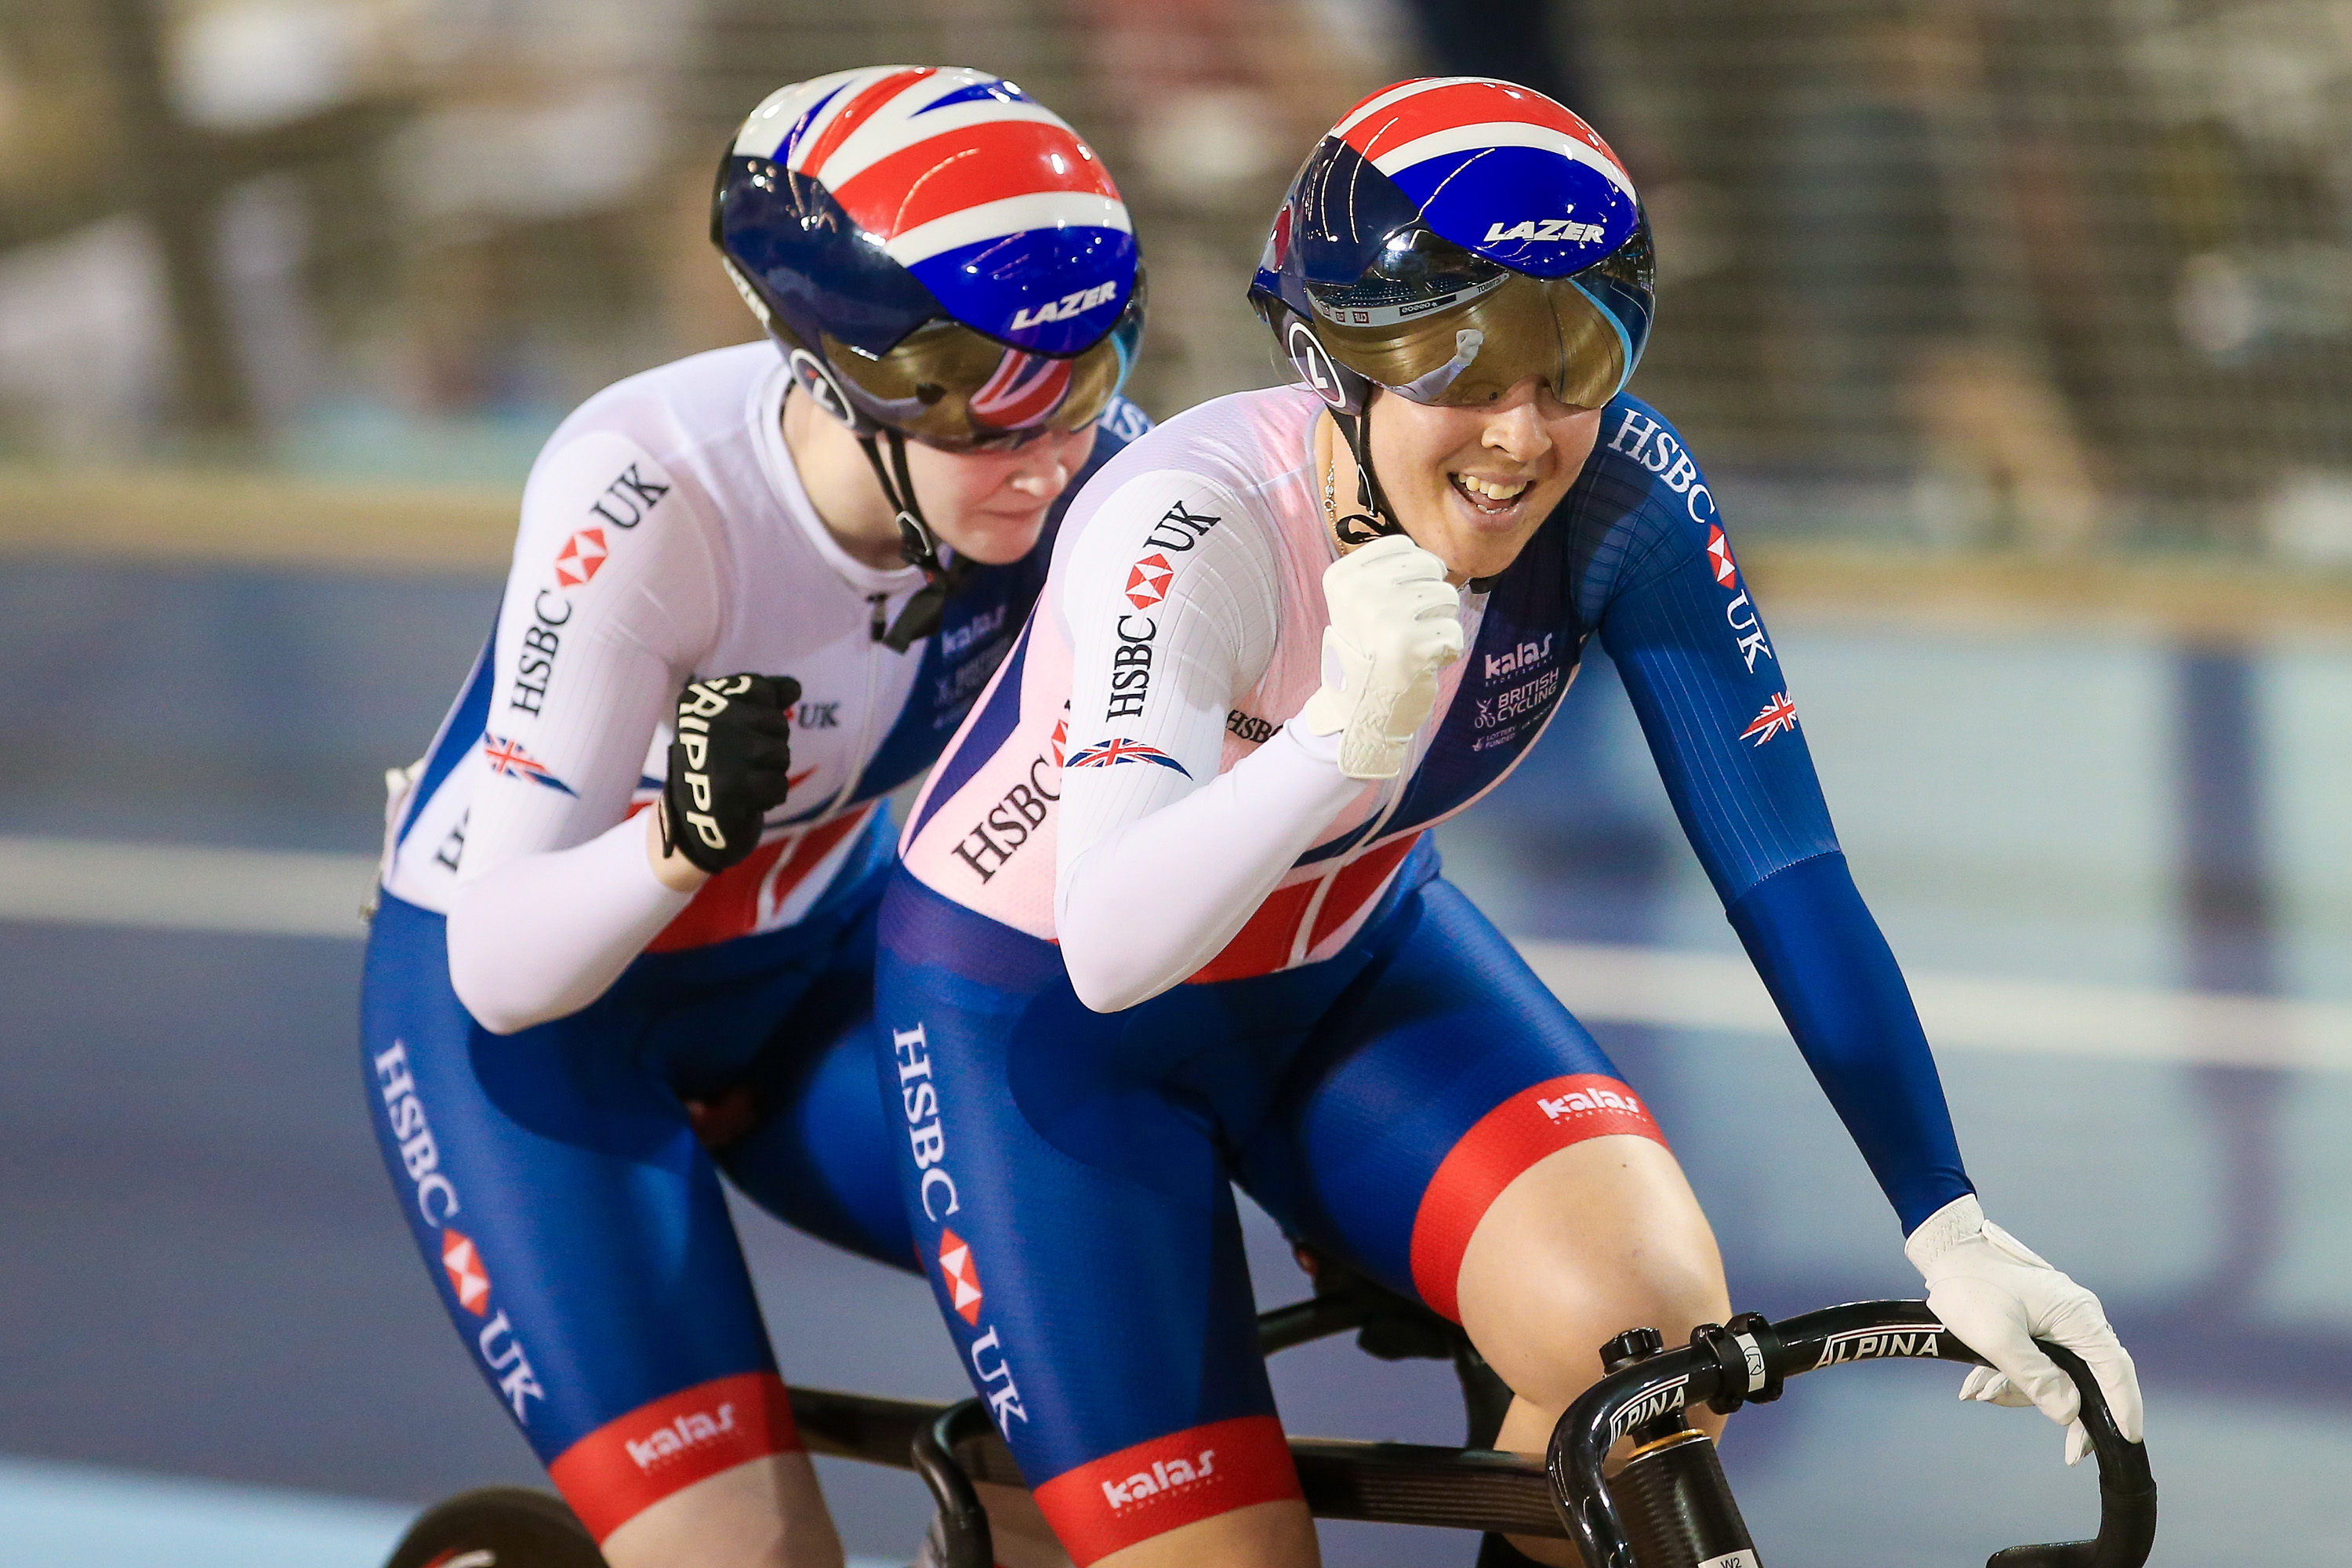 Sophie Thornhill and pilot Corrine Hall teamed up for the first time in 2017 and celebrated a hat-trick of titles at the UCI Para-cycling Track World Championships